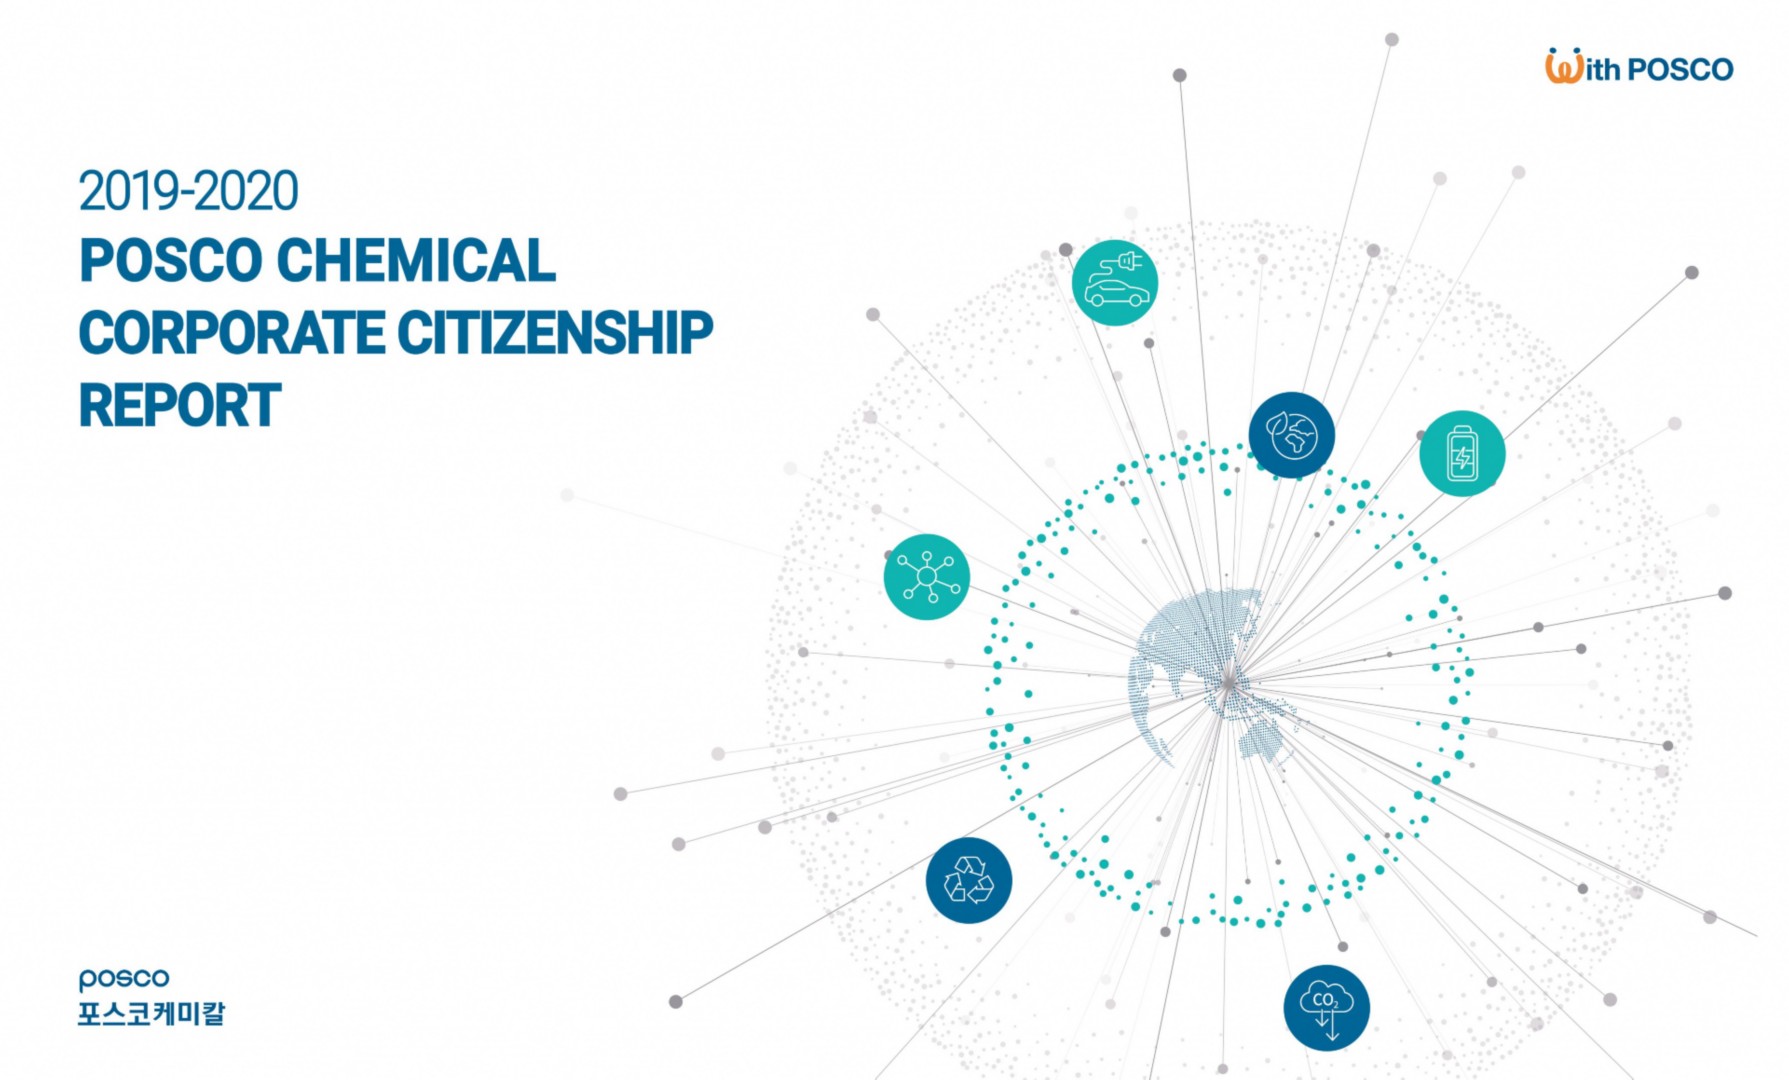 POSCO Chemical published a Corporate Citizenship Report, which presents its achievements in ESG areas foucused on data and numbers